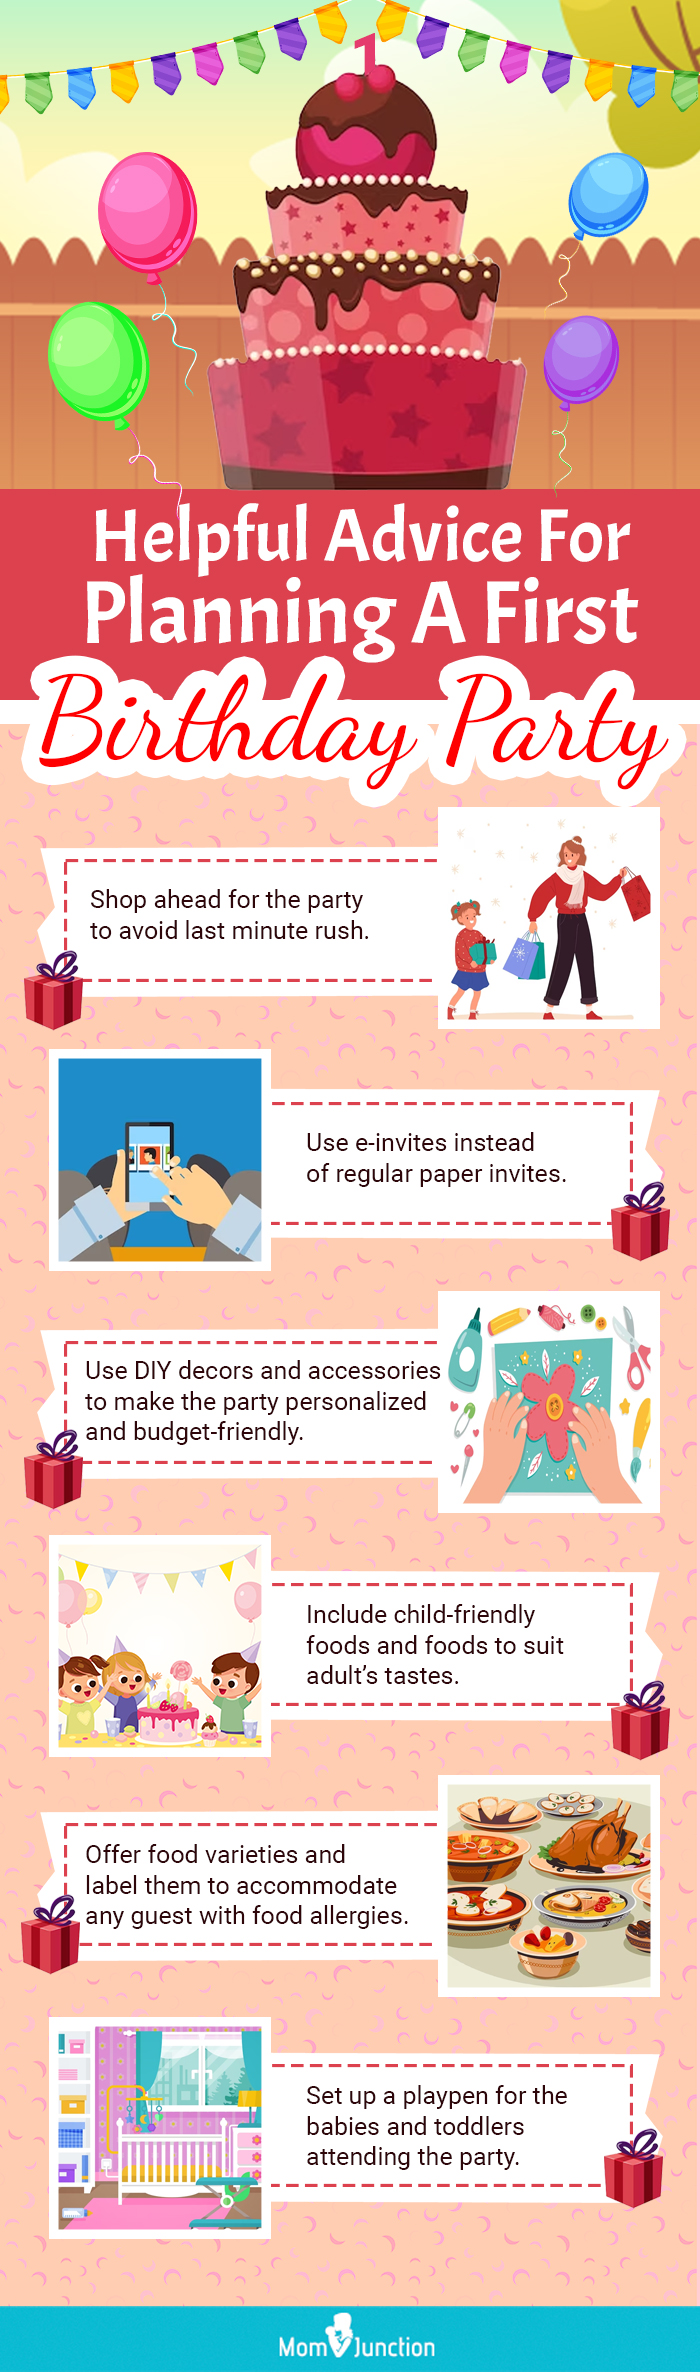 helpful advice for planning a first birthday party (infographic)